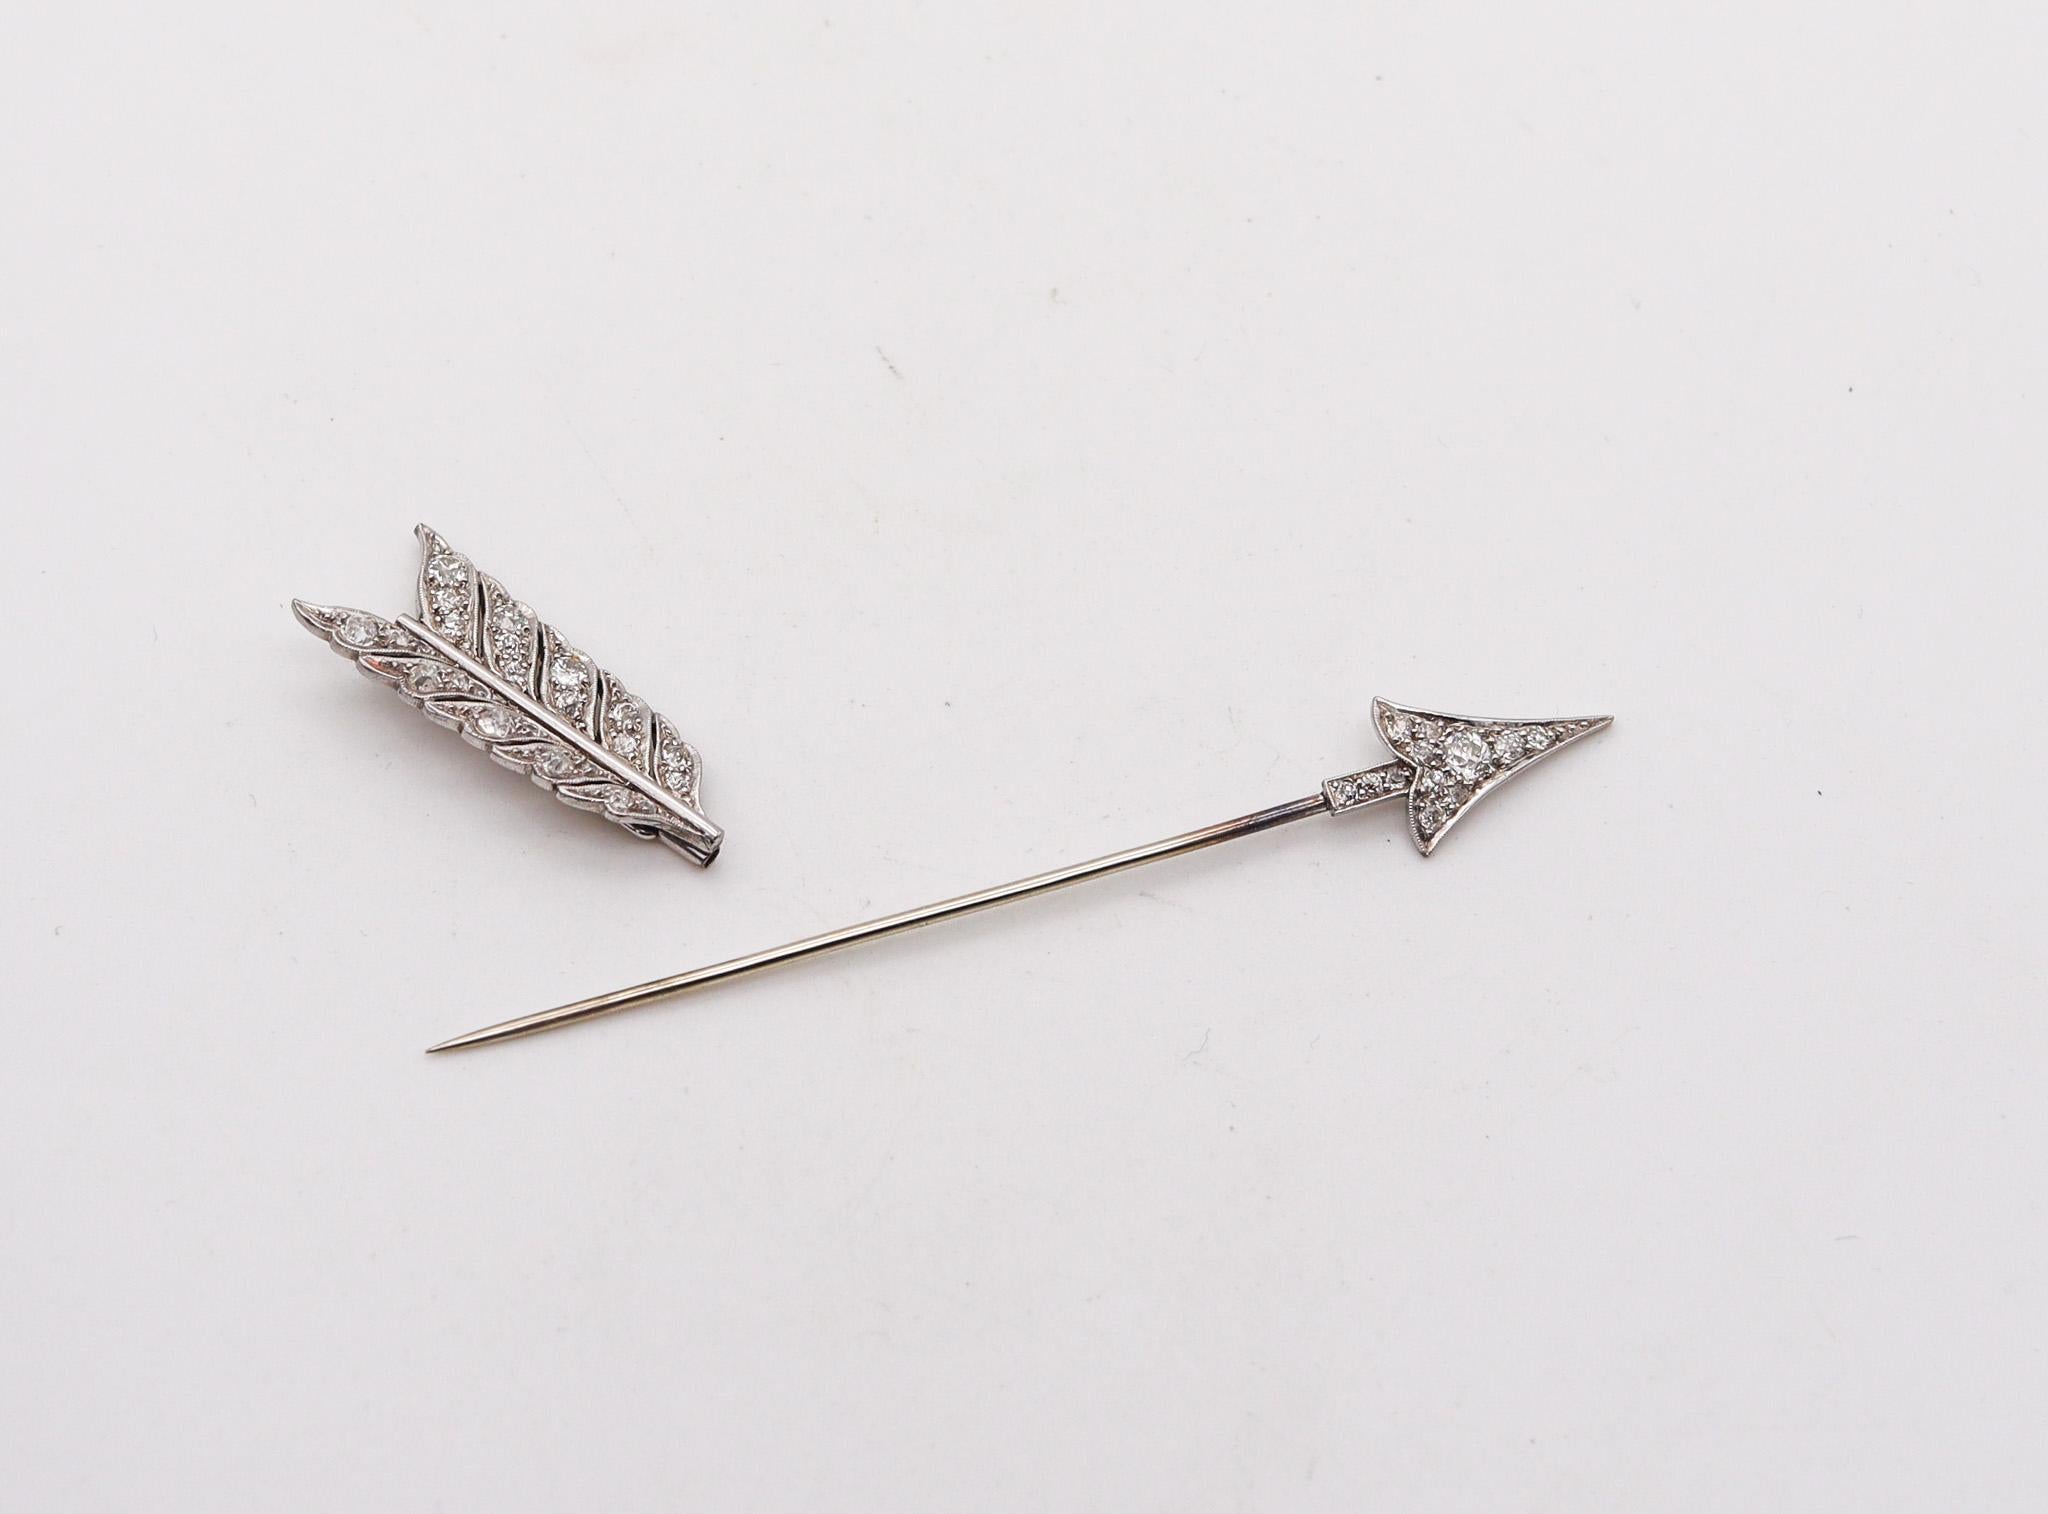 Bailey Banks & Biddle 1925 Art Deco Arrow Jabot In Platinum 18Kt And Diamonds For Sale 3